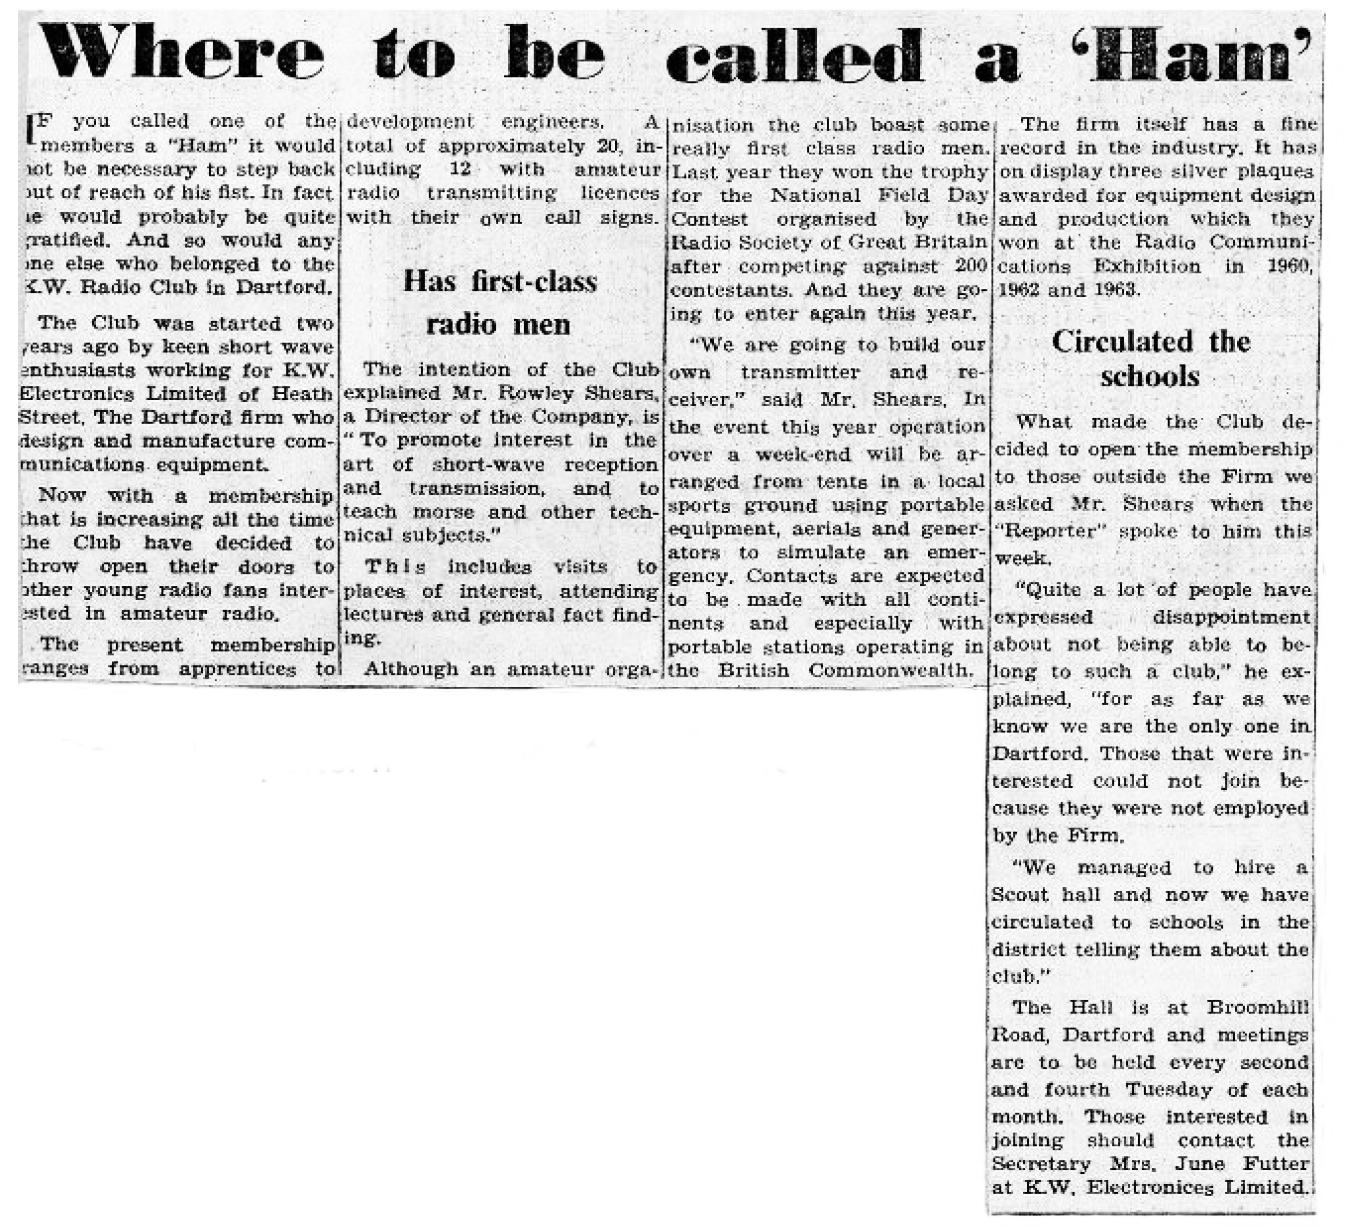 Newspaper Article - Where to be called a Ham - Dartford Reporter 14th May 1965